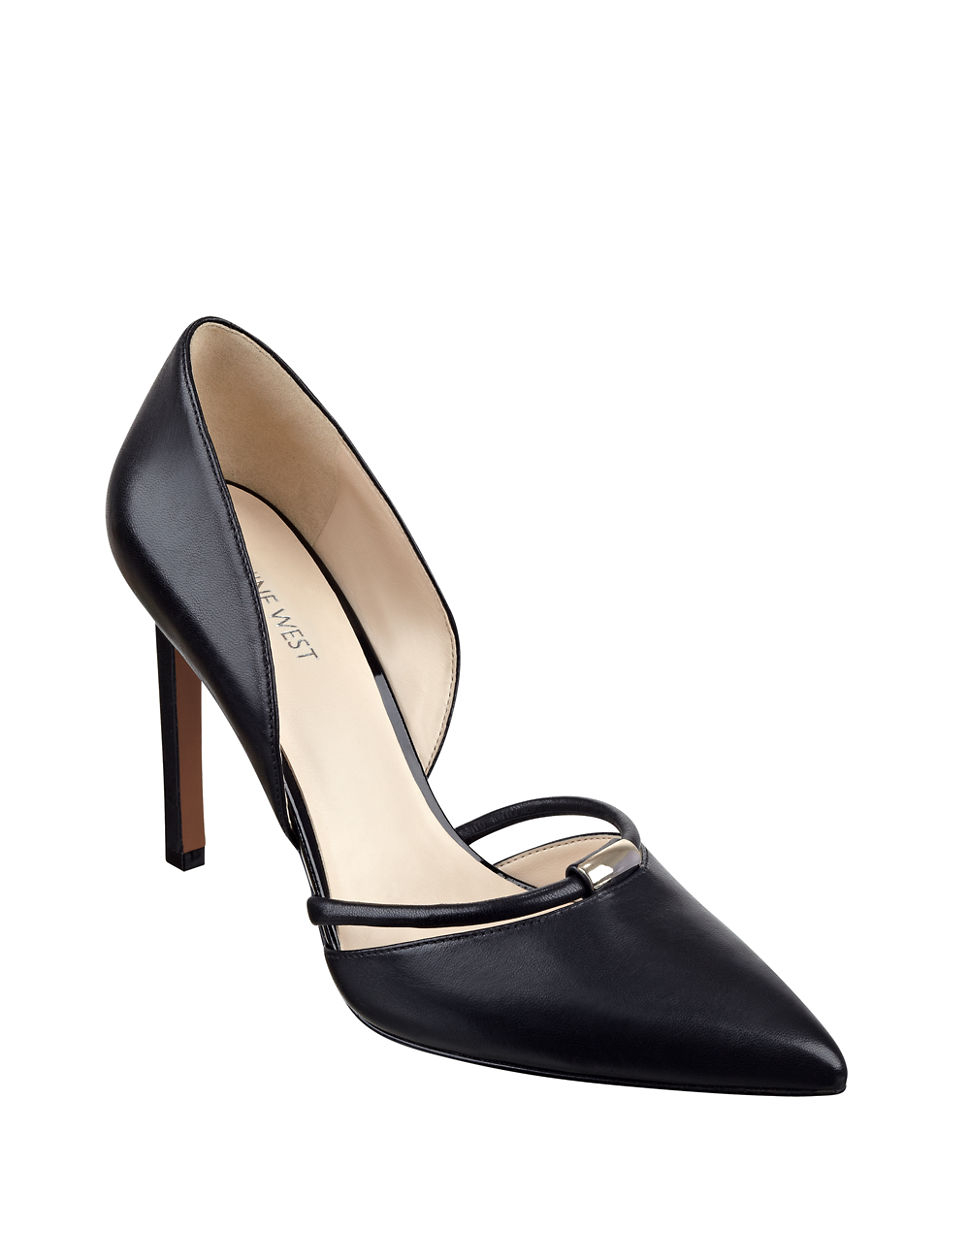 Lyst - Nine West Takeitez Leather Pointed-Toe Pumps in Black